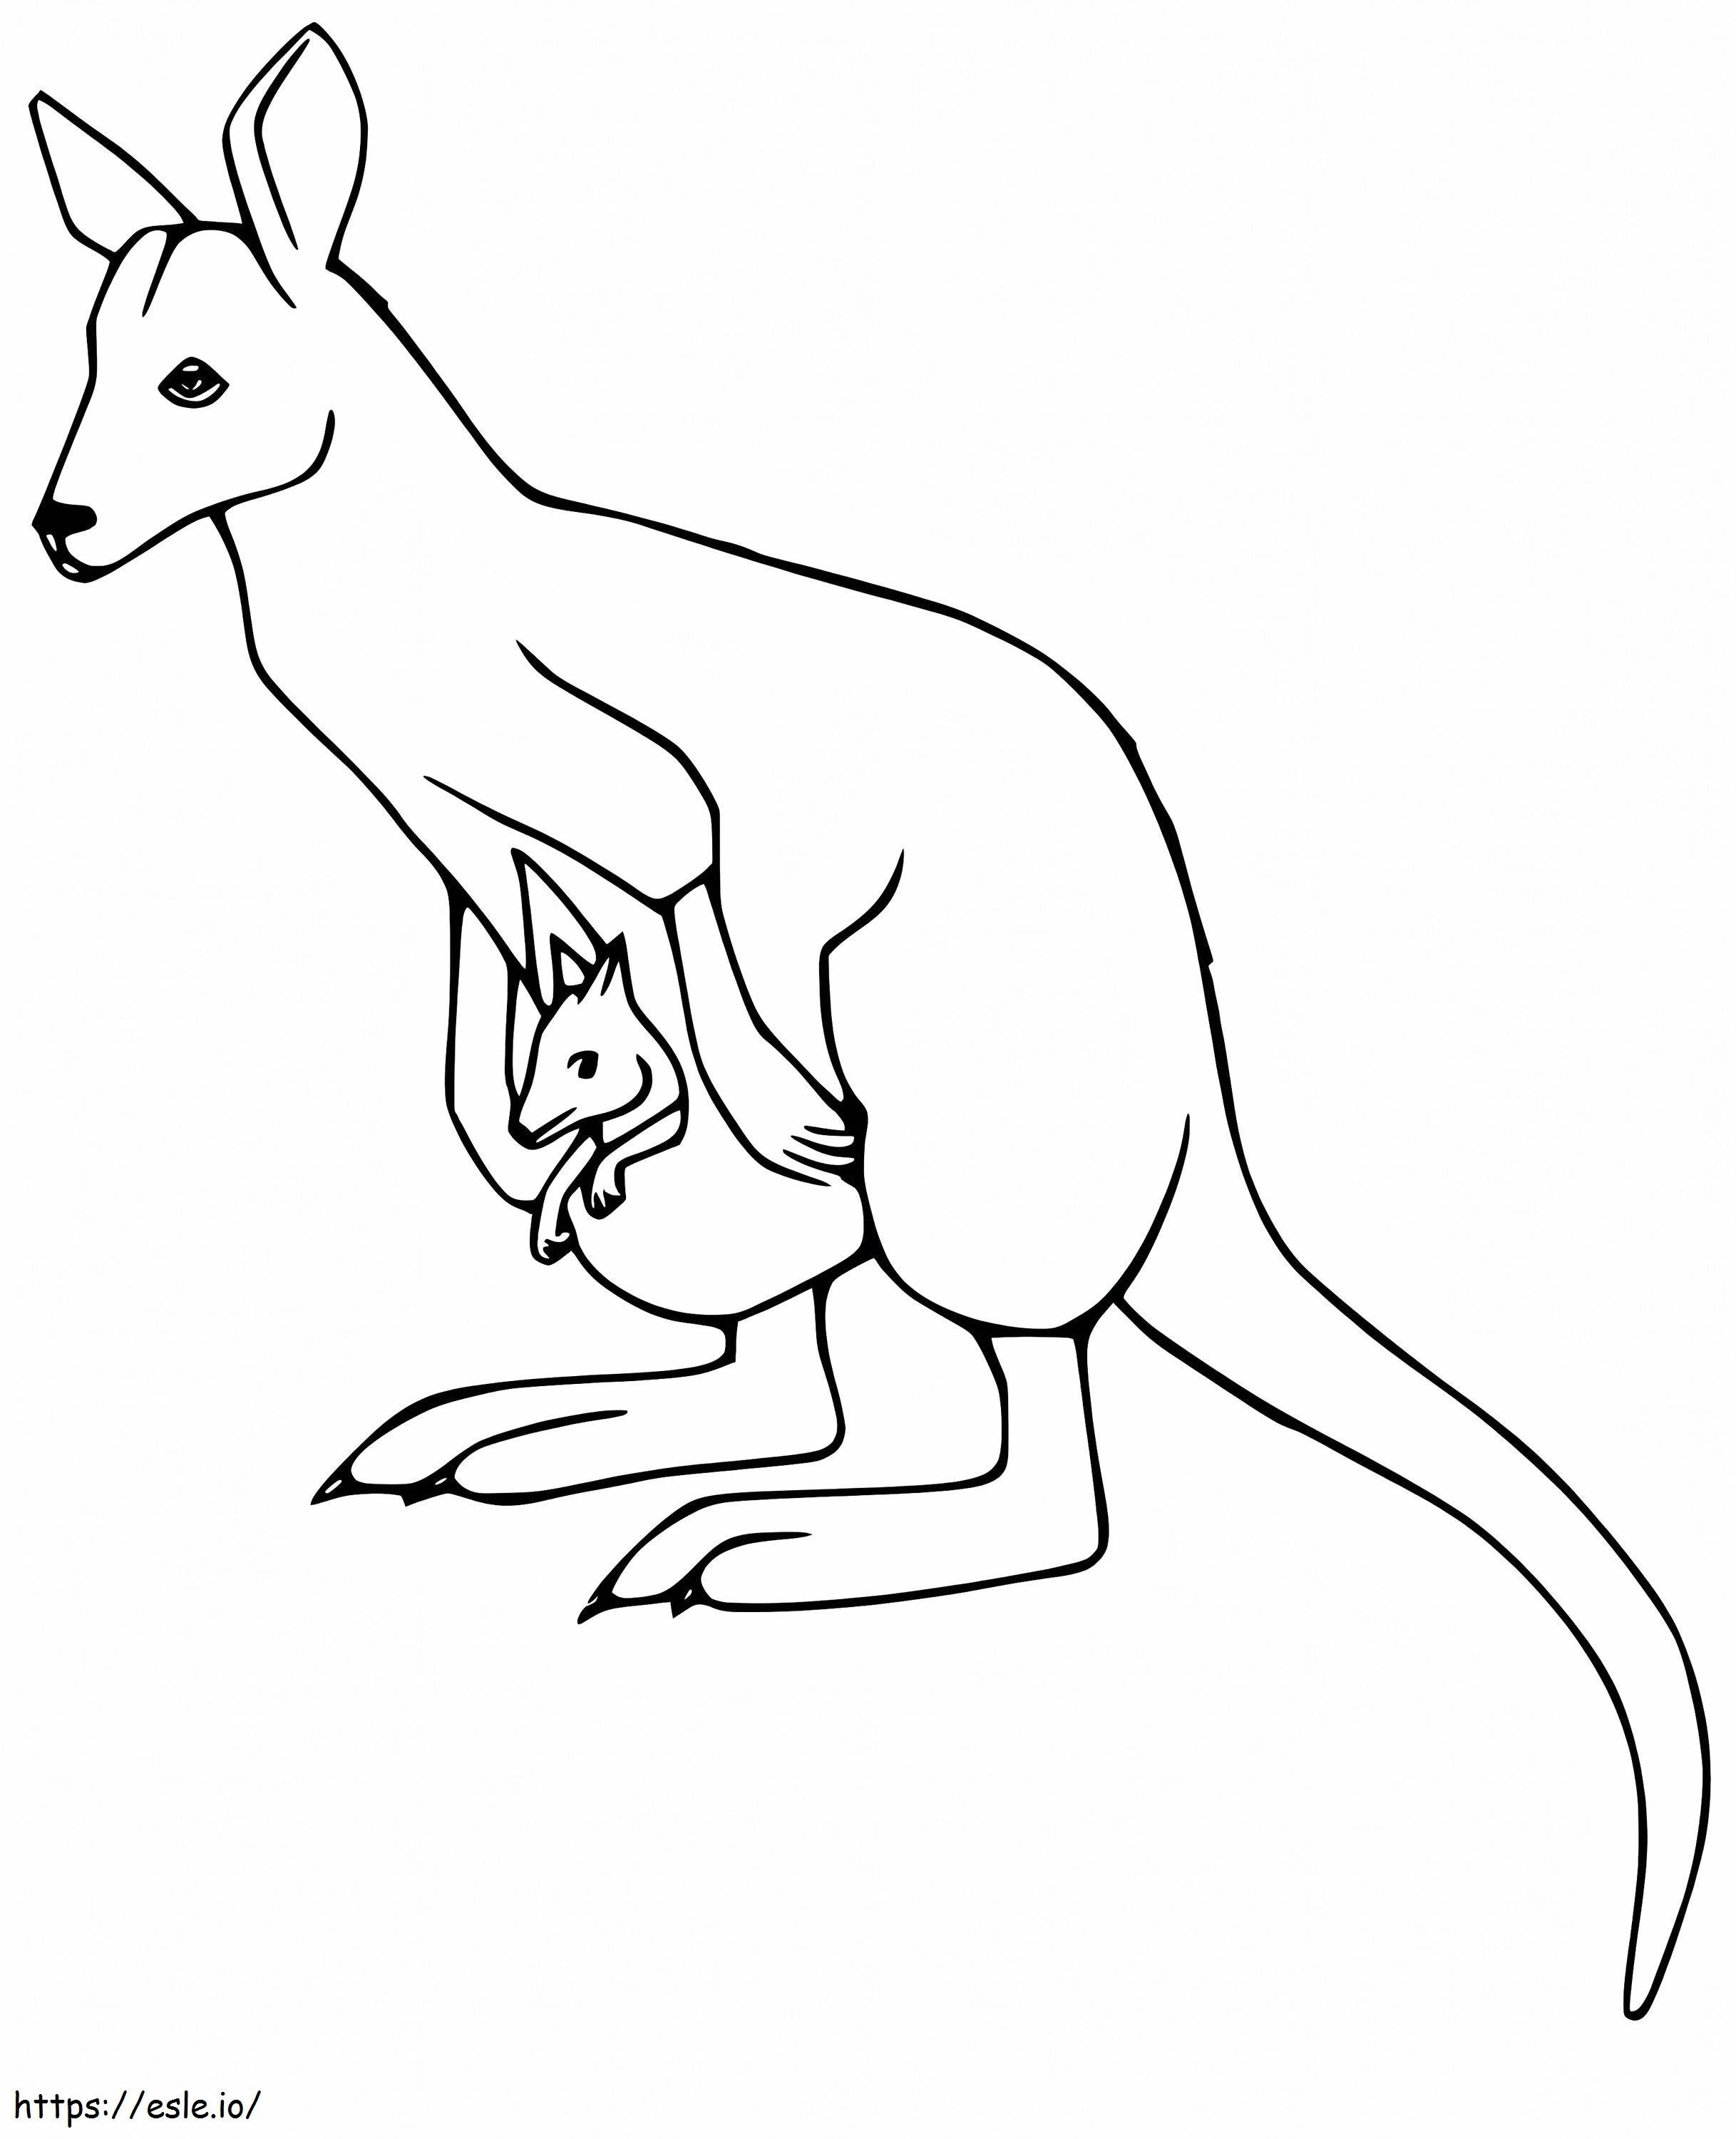 Wallaby With Baby coloring page